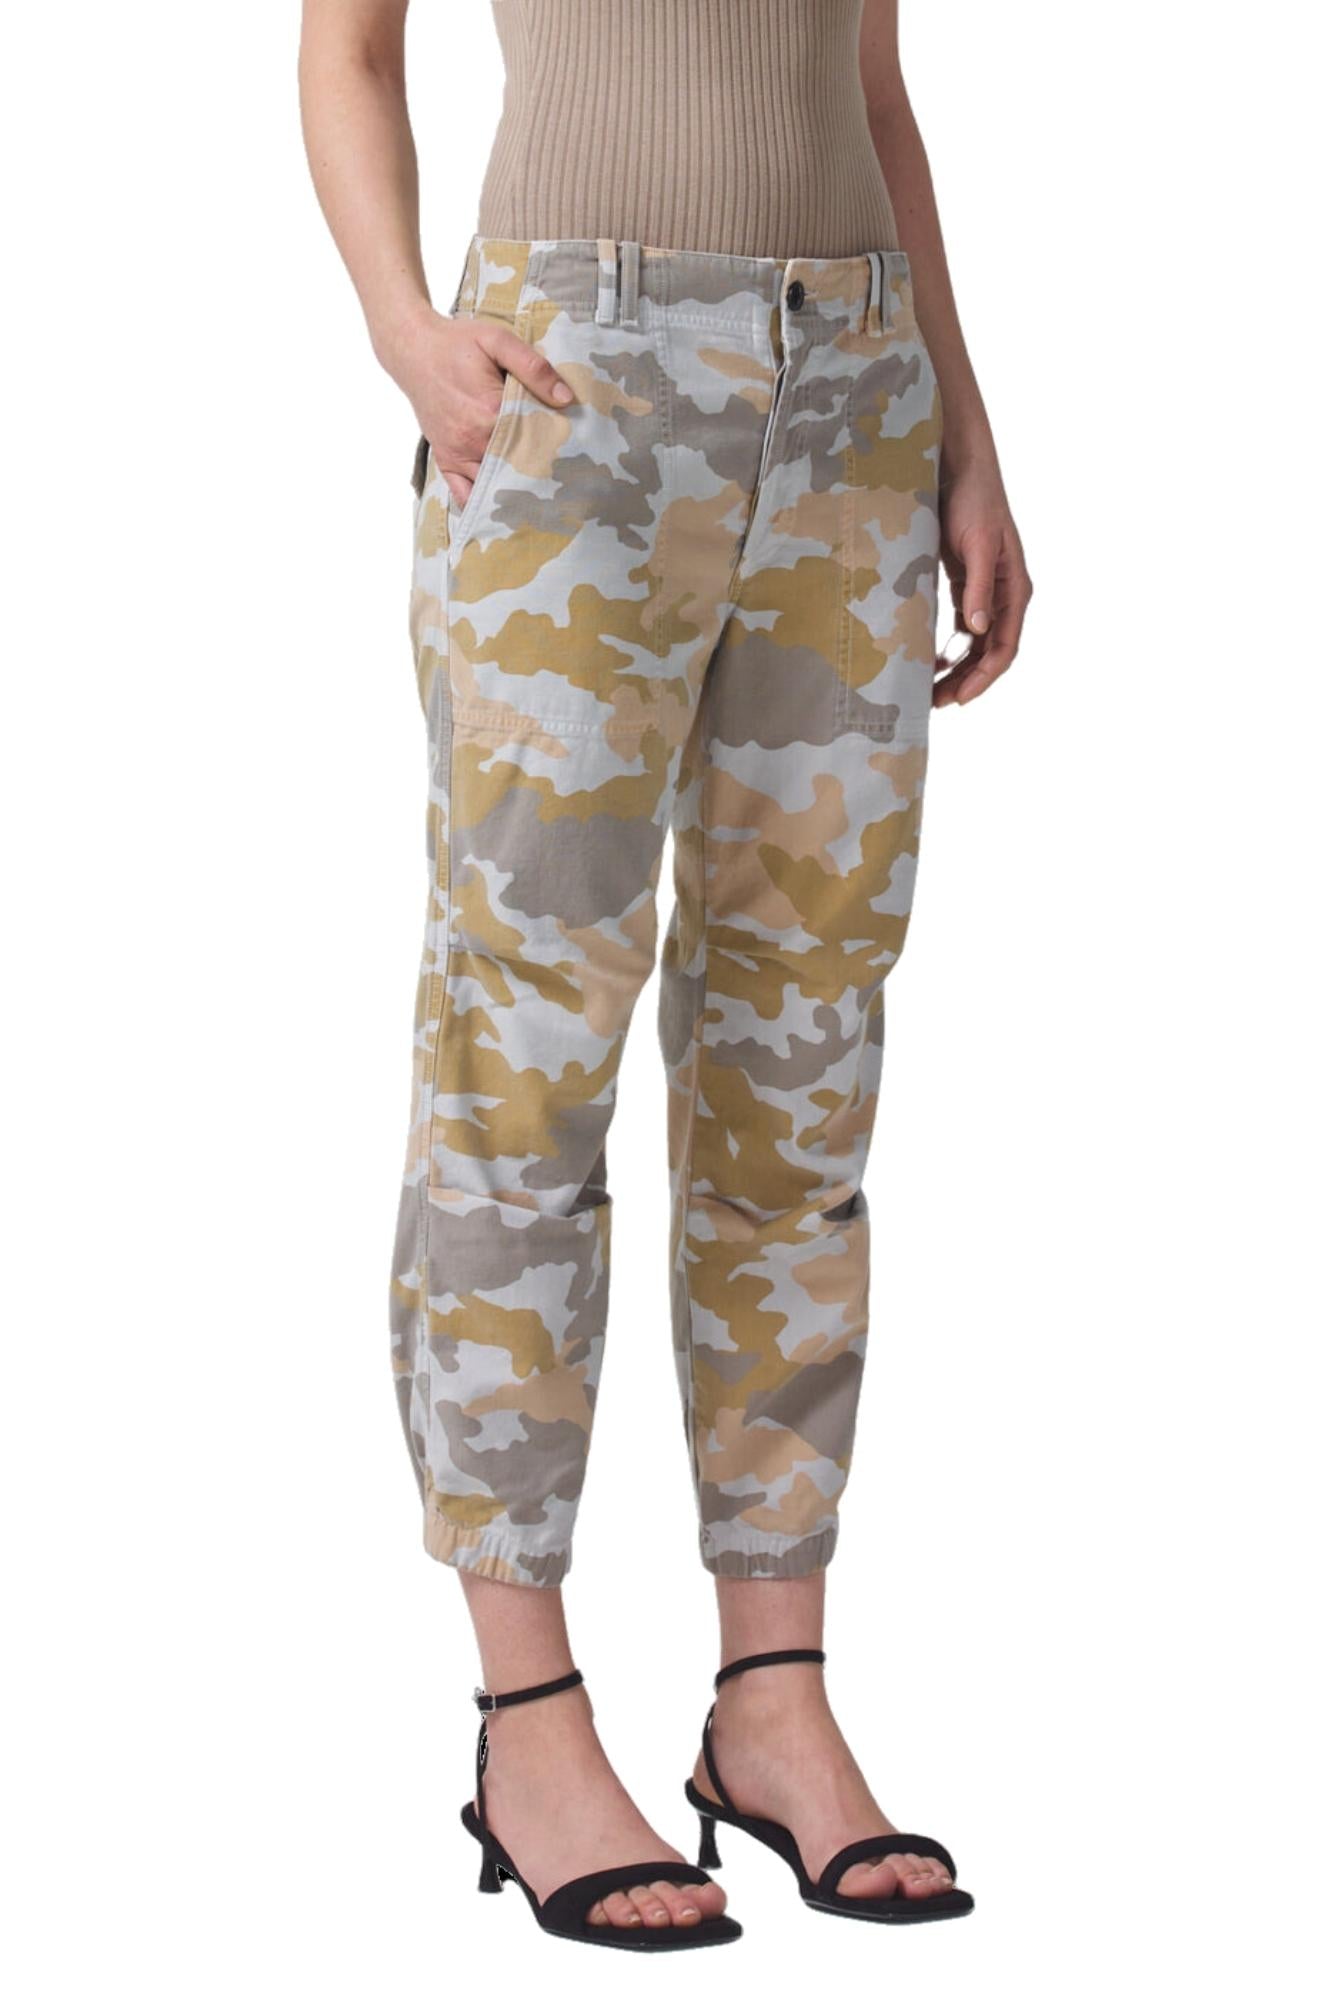 AGNI-UTILITY-TROUSER-IN-PRINT-PINK-CAMO-SUNSET-HIDEAWAY-2